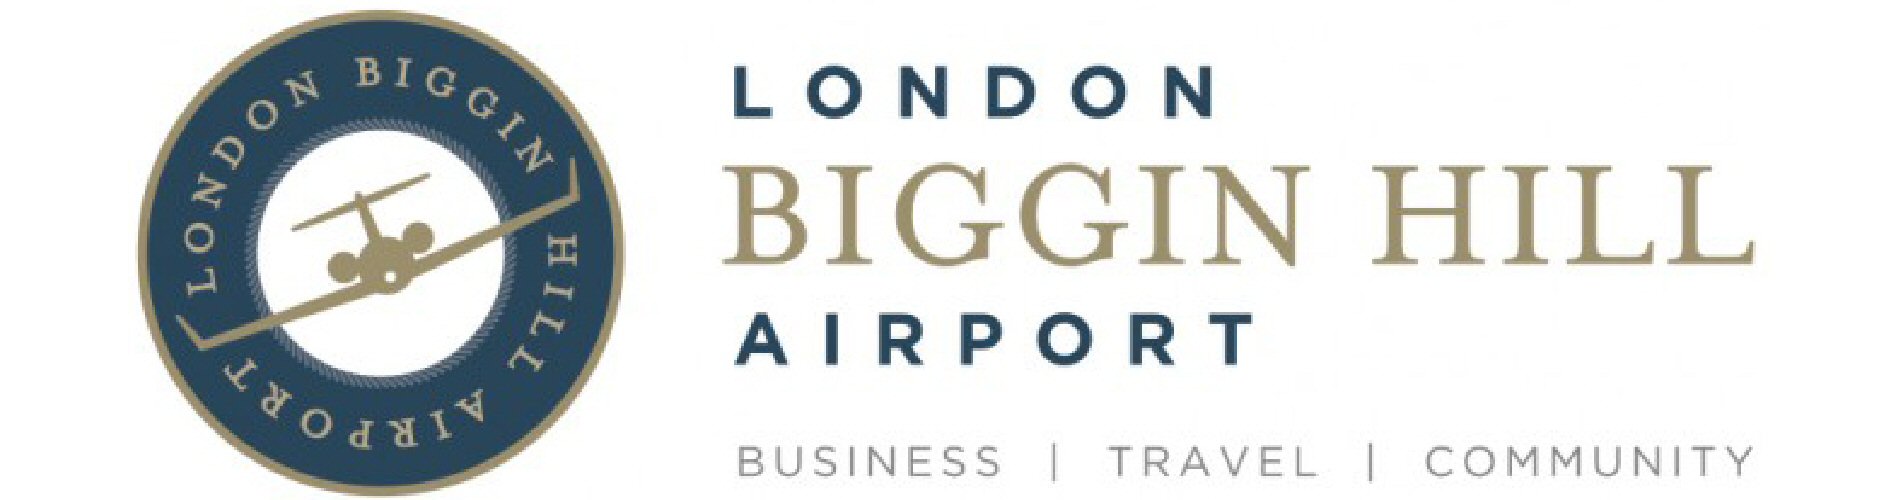 Biggin Hill Airport. Corporate accounts and contract work are welcomed